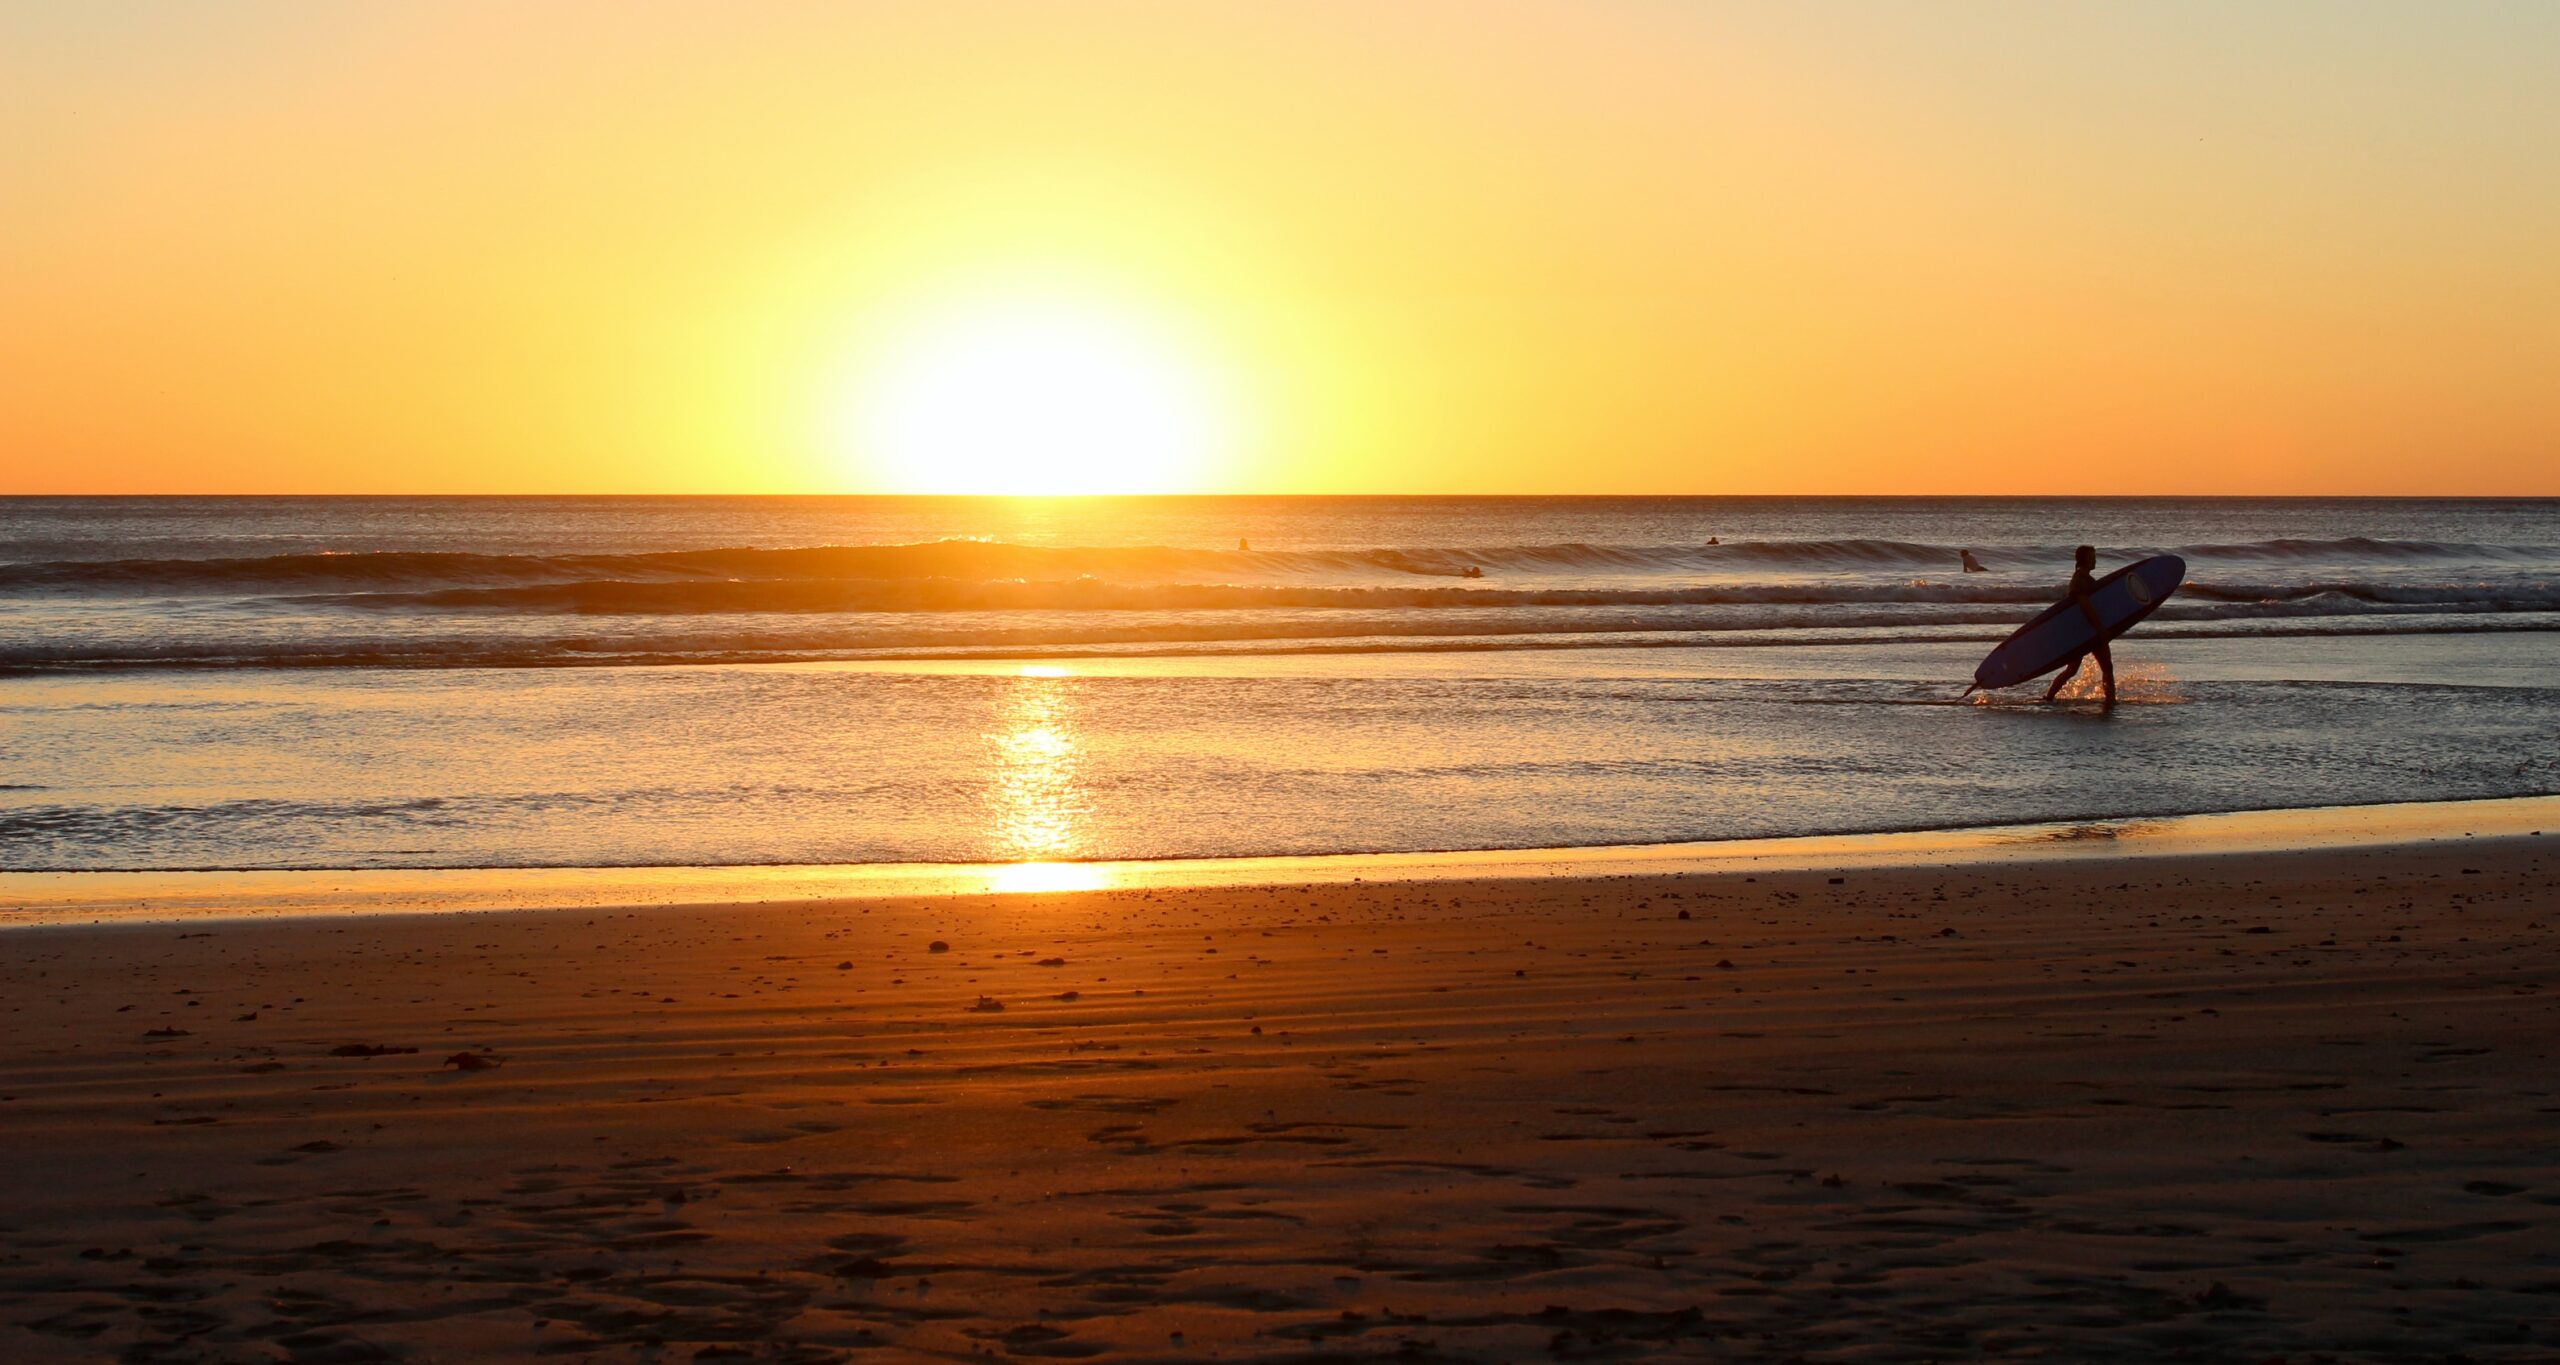 Can I Witness Sunrise Or Sunset Views At Specific Beaches In Nicaragua?